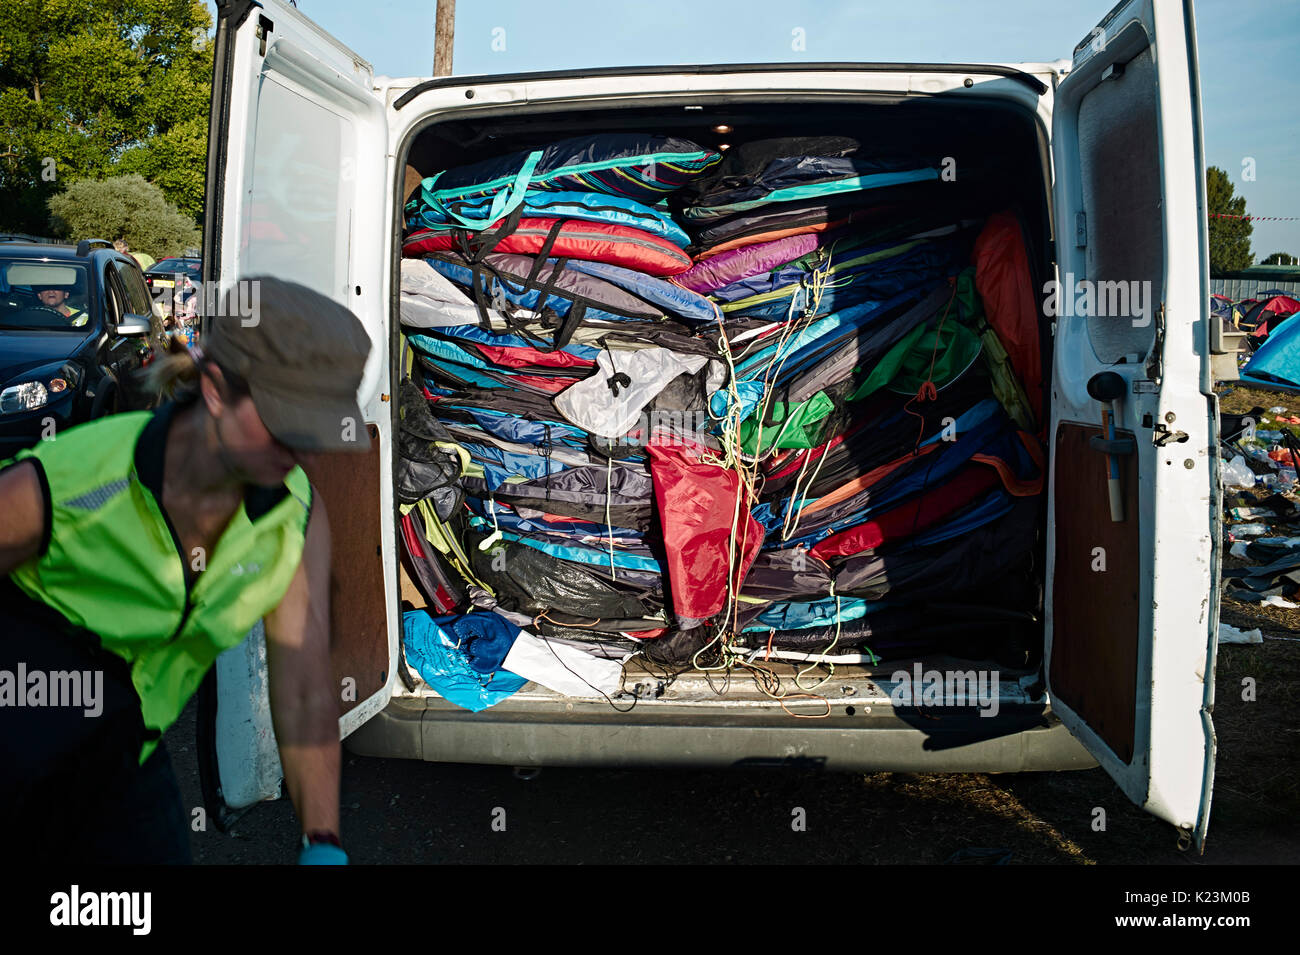 Reading, UK. 28th Aug, 2017.   Charity volunteers salvage tents and camping items to send to refugees in Calais and Dunkirk. The aftermath of Reading Festival start the huge clean-up operation begins.Thousands of revellers decided to ditch their tents in the fields following the bank holiday weekend rock festival. Over half a dozen fields where festival-goers camped are now littered with rubbish and abandoned tents. Credit: john angerson/Alamy Live News Stock Photo